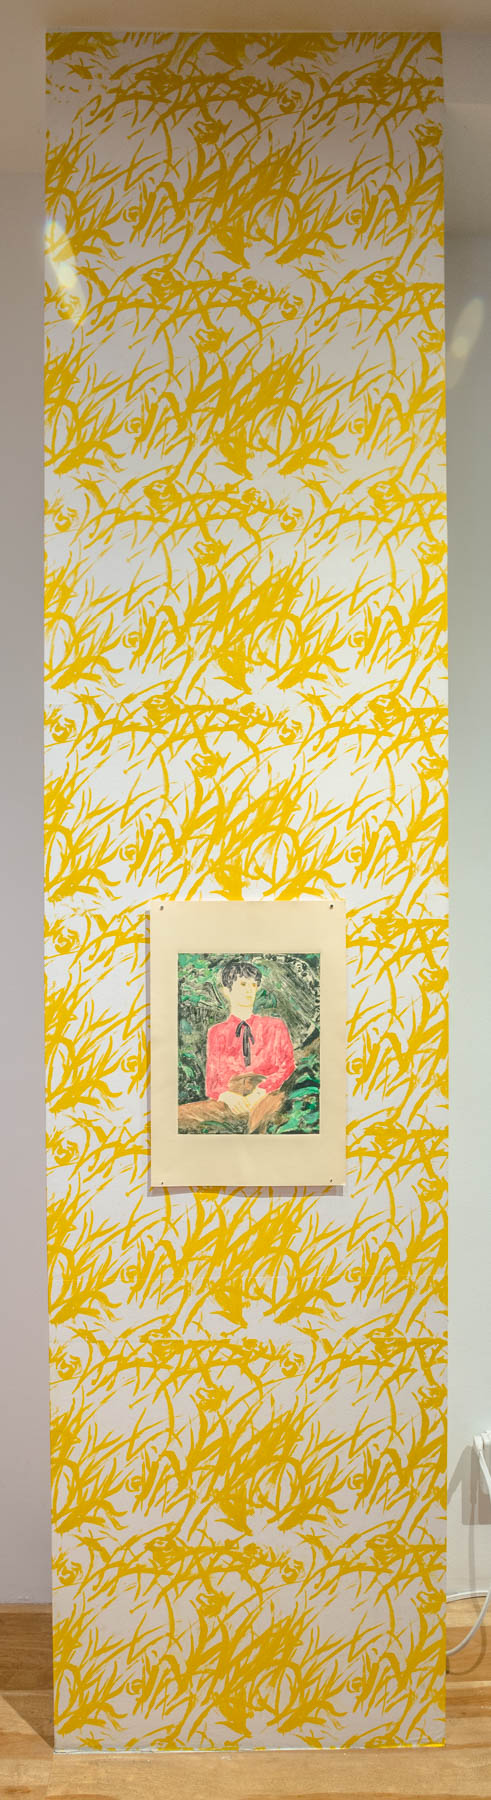 10-Ron Siu. The Middle Child, 2020. Monotype on paper over hand-printed wallpaper, image size 11 x 14 inches, paper size 15 x 22 inches